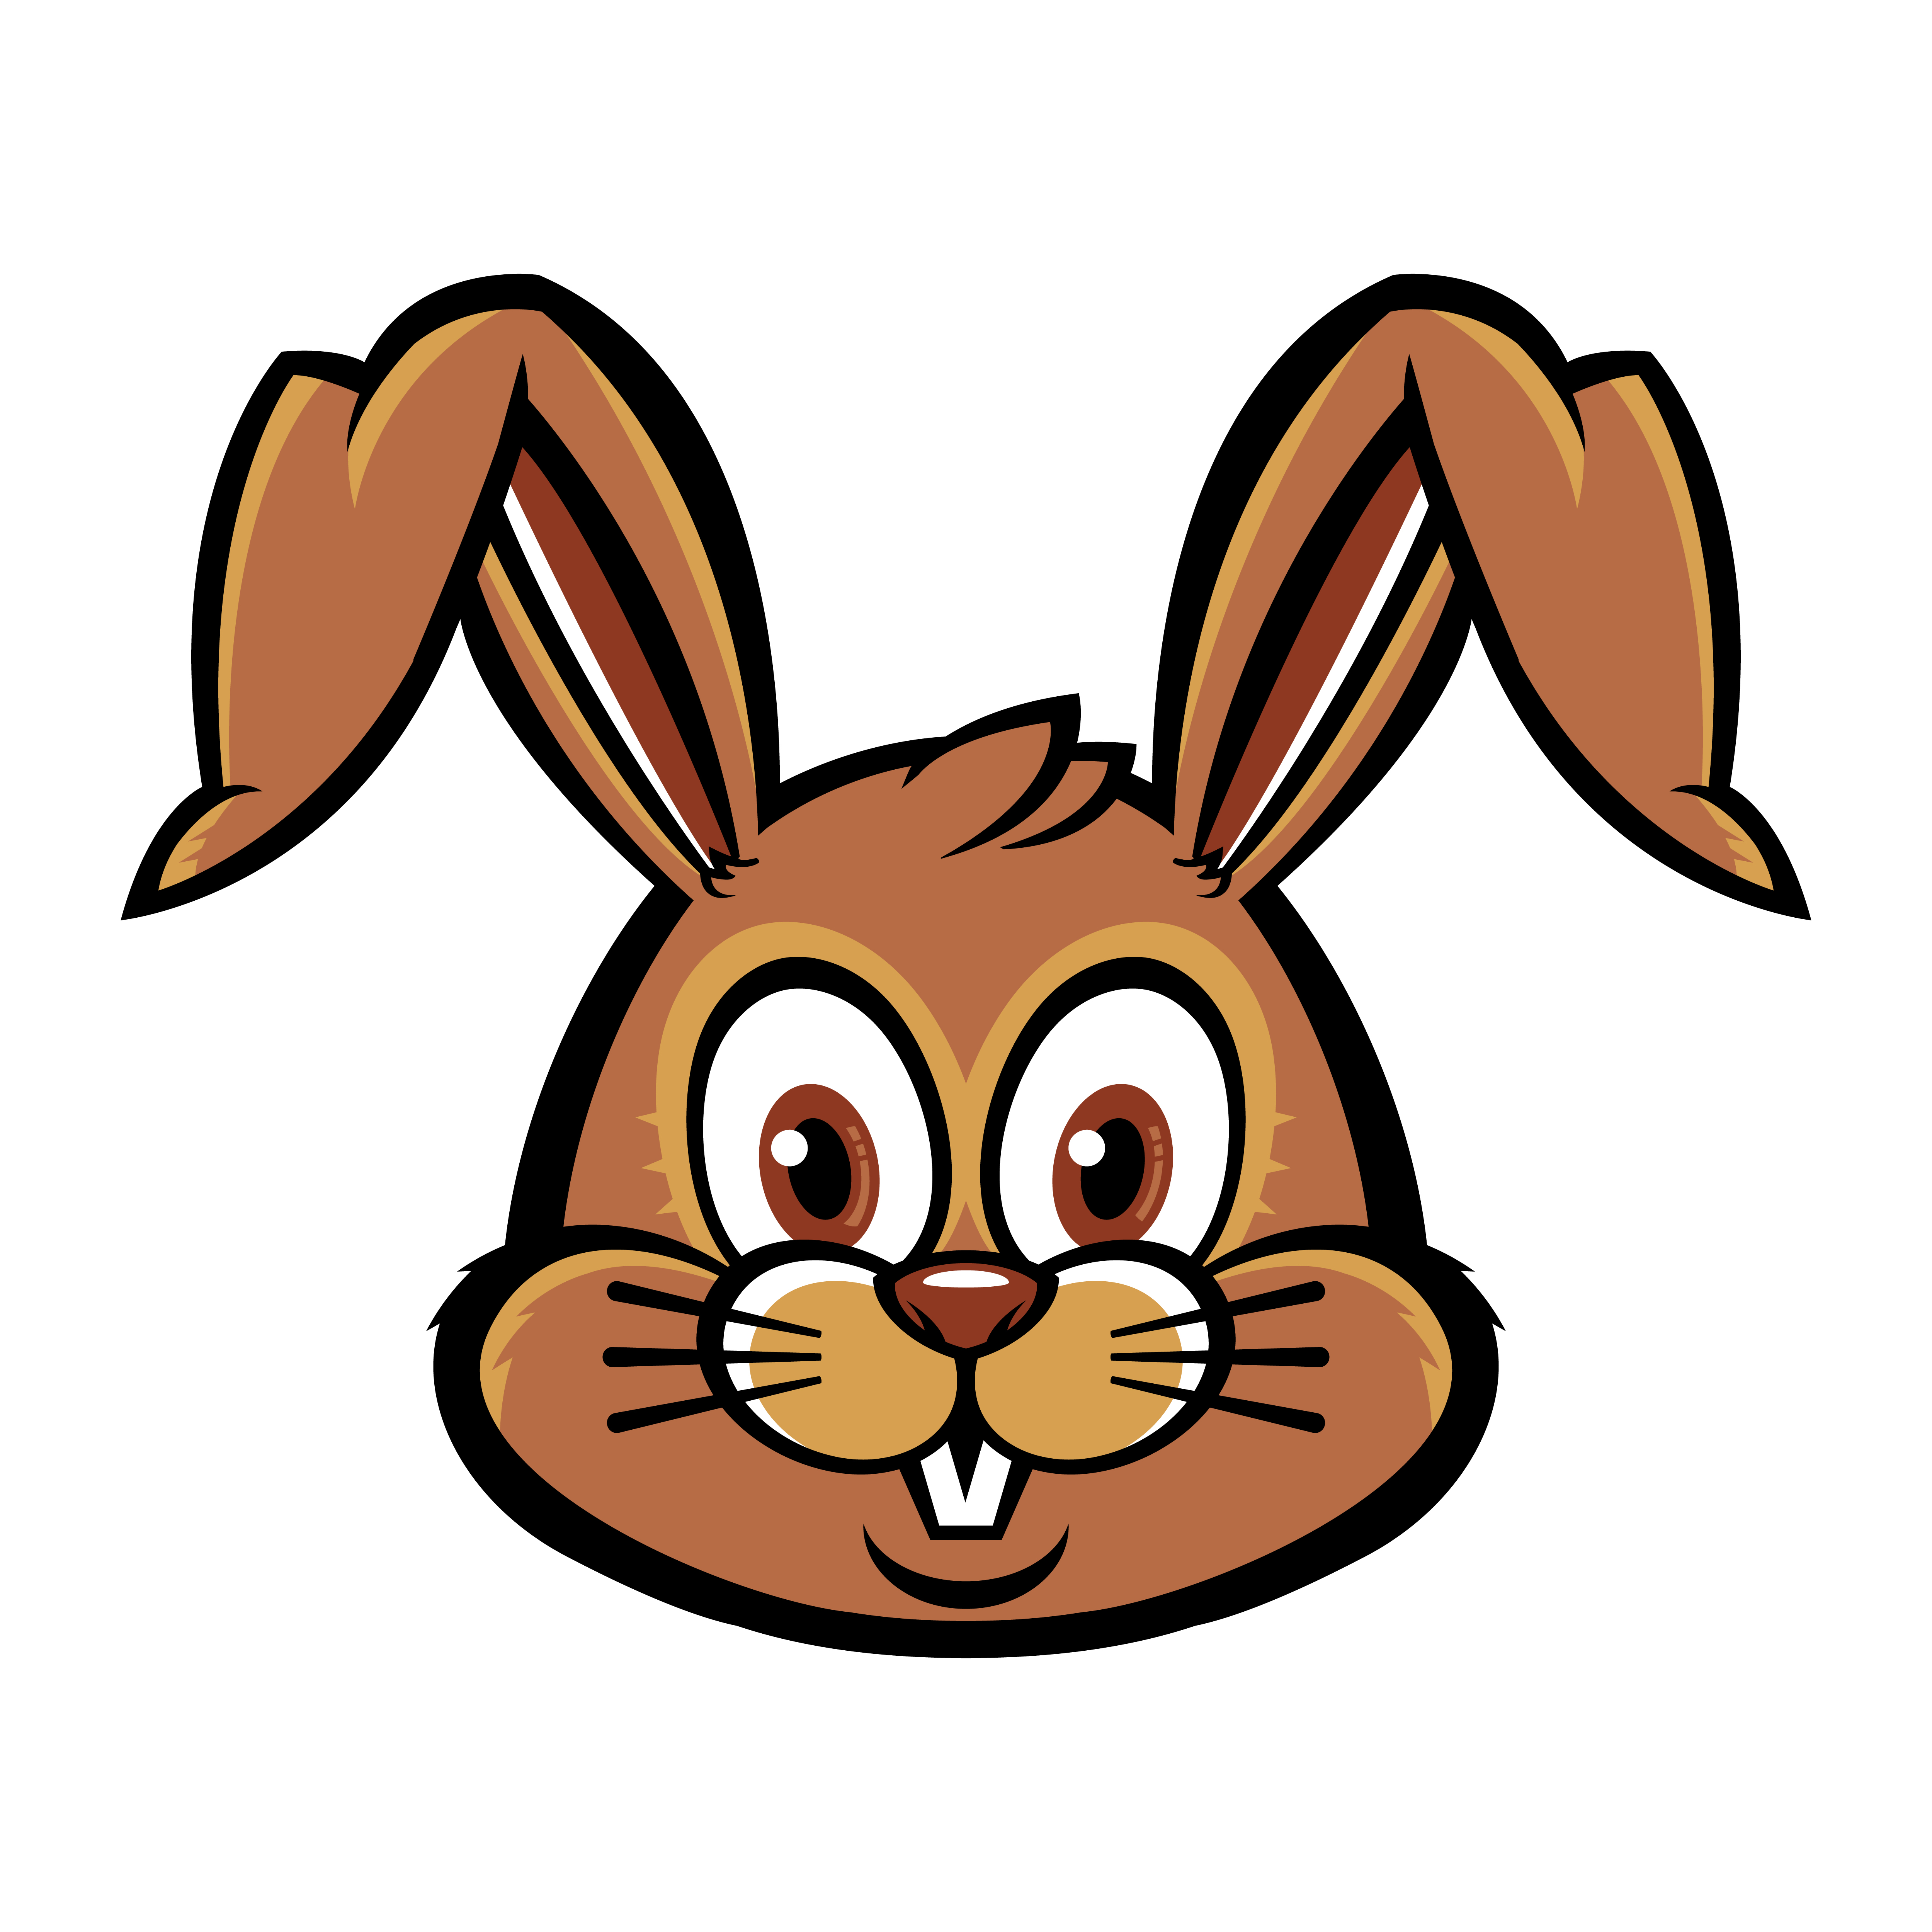 Bunny Face Cartoon / Clipart Panda - Free Clipart Images : Eps10 and